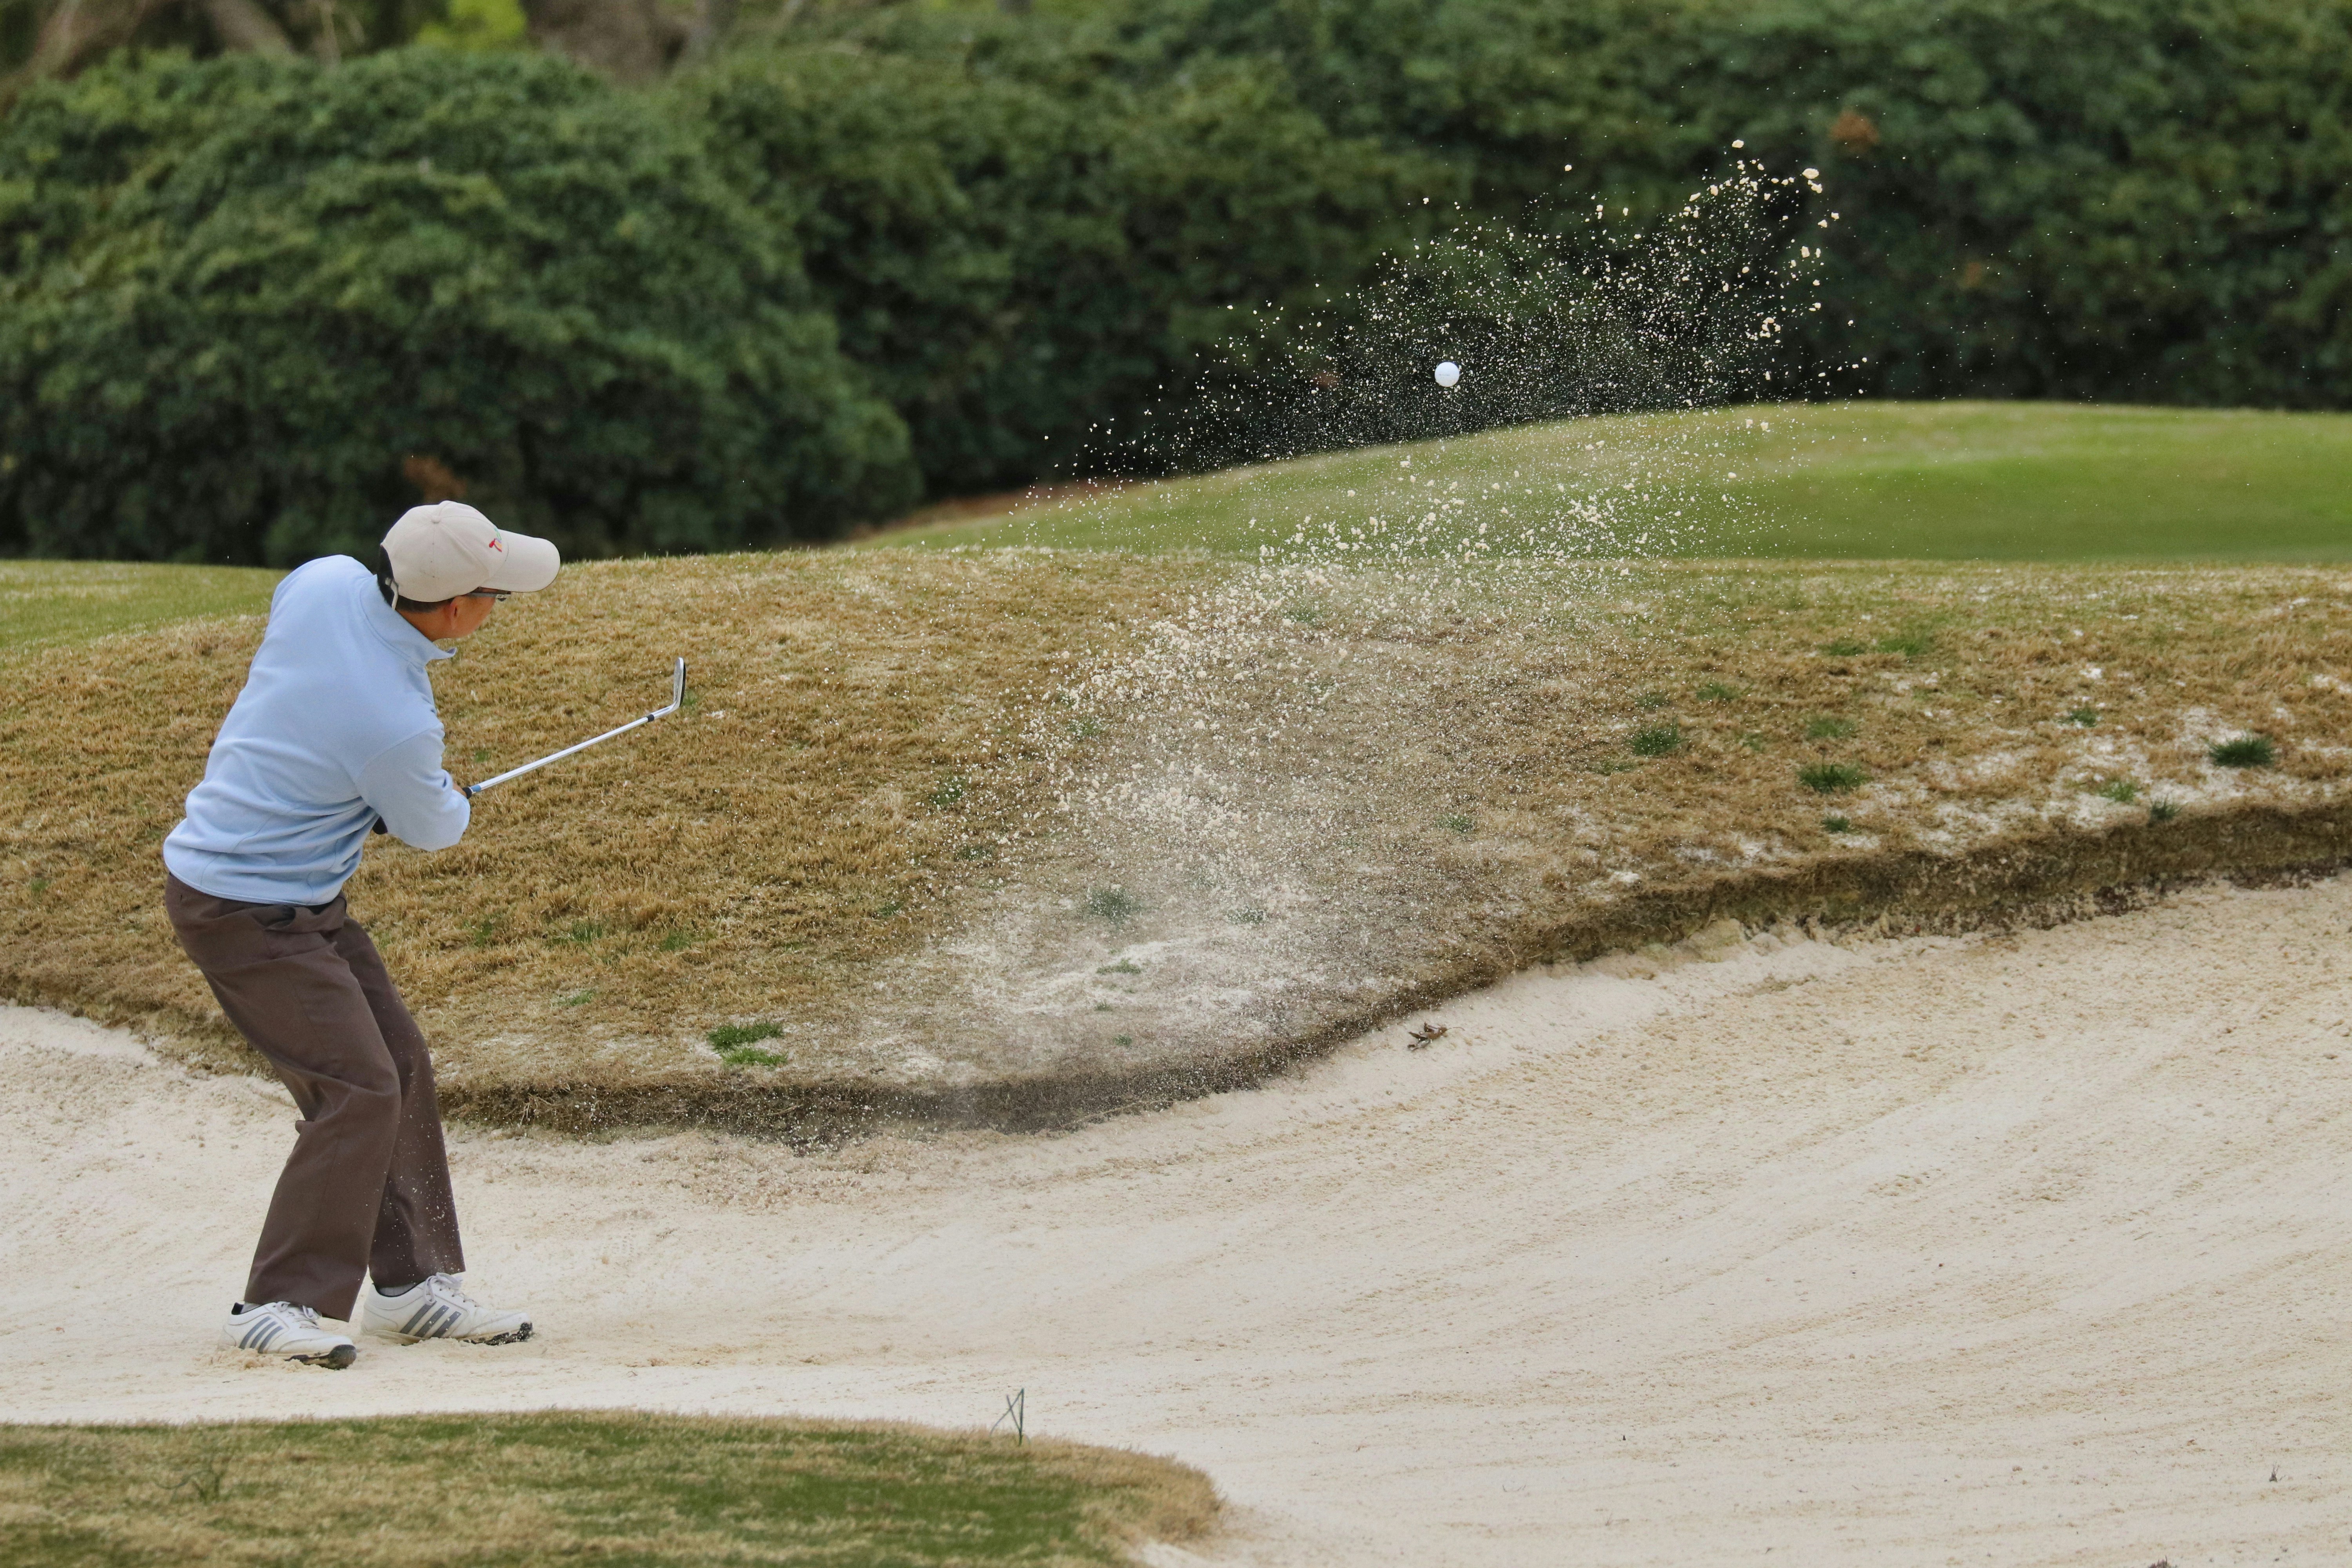 Golfer hits golf ball out of the sand trap onto the green at the Prestonwood Golf Course in Cary, North Carolina.